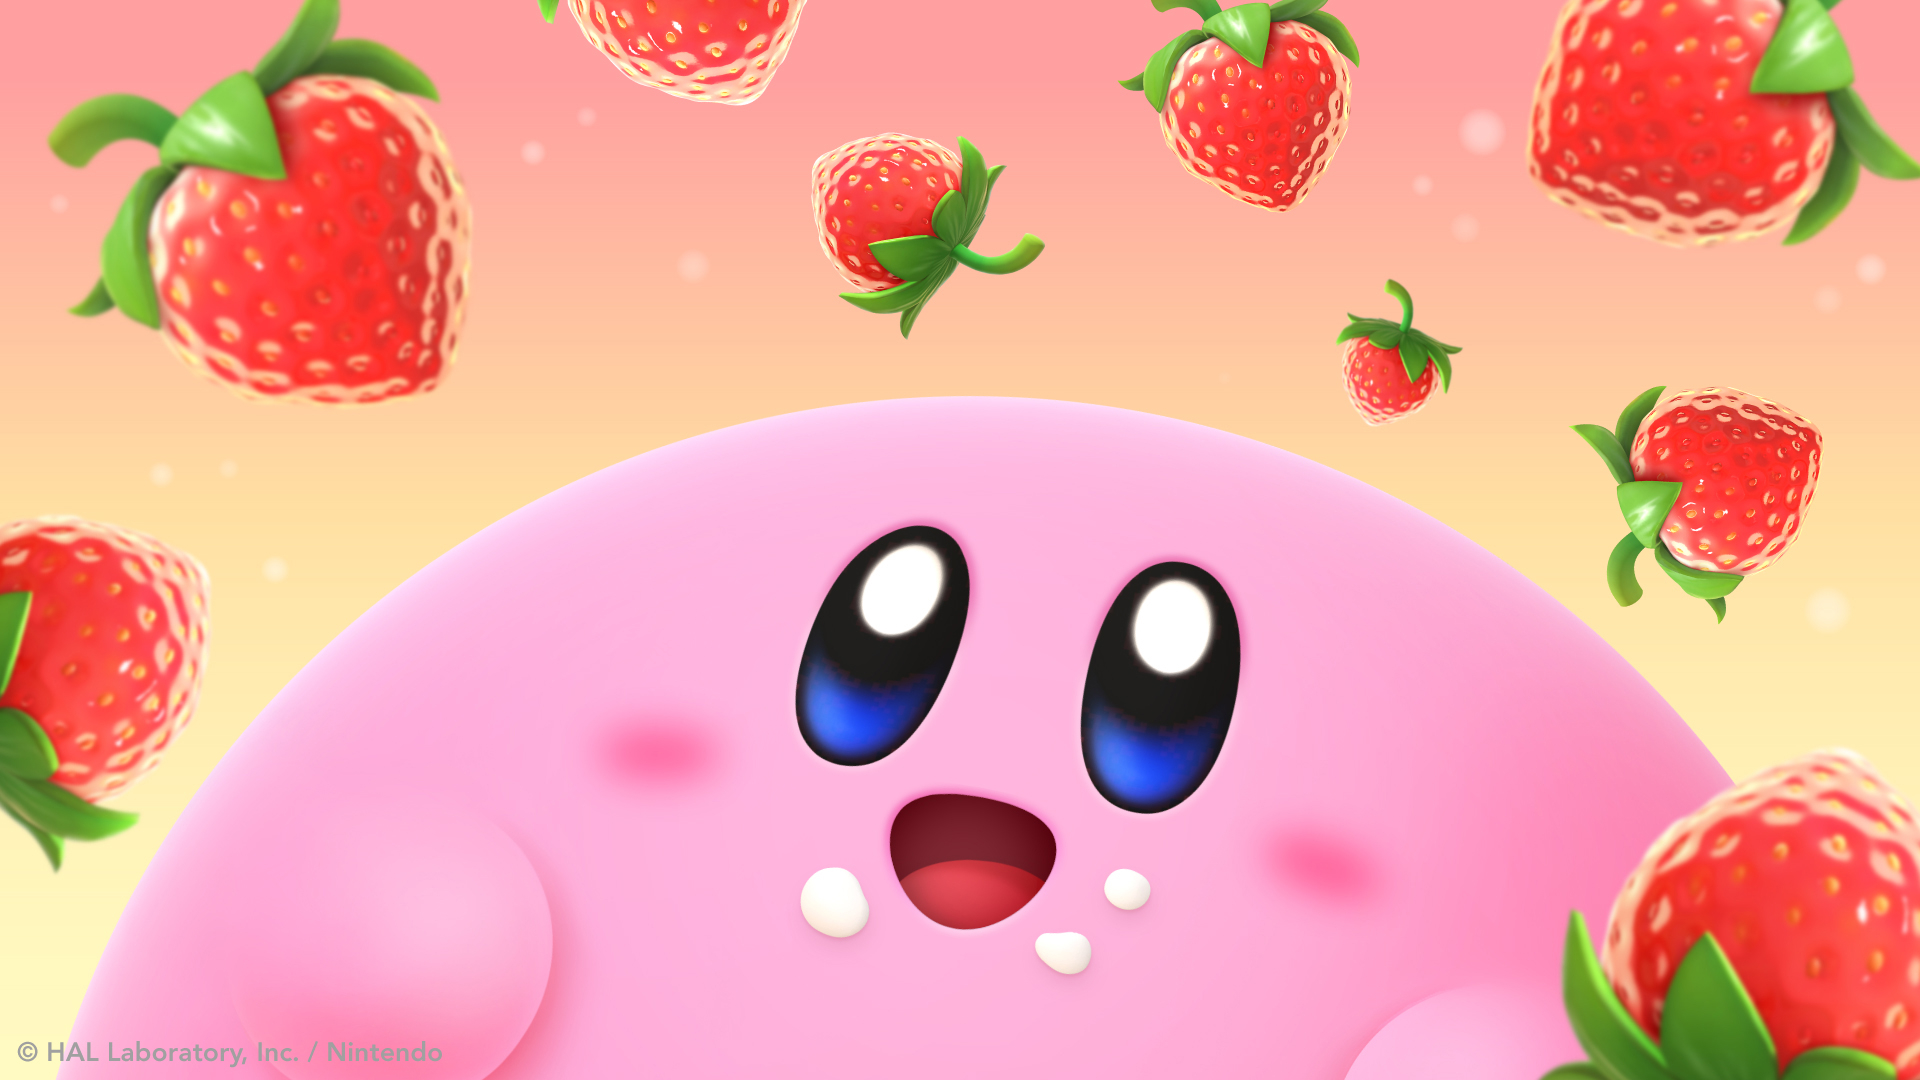 Kirby phone wallpaper» 1080P, 2k, 4k Full HD Wallpapers, Backgrounds Free  Download | Wallpaper Crafter